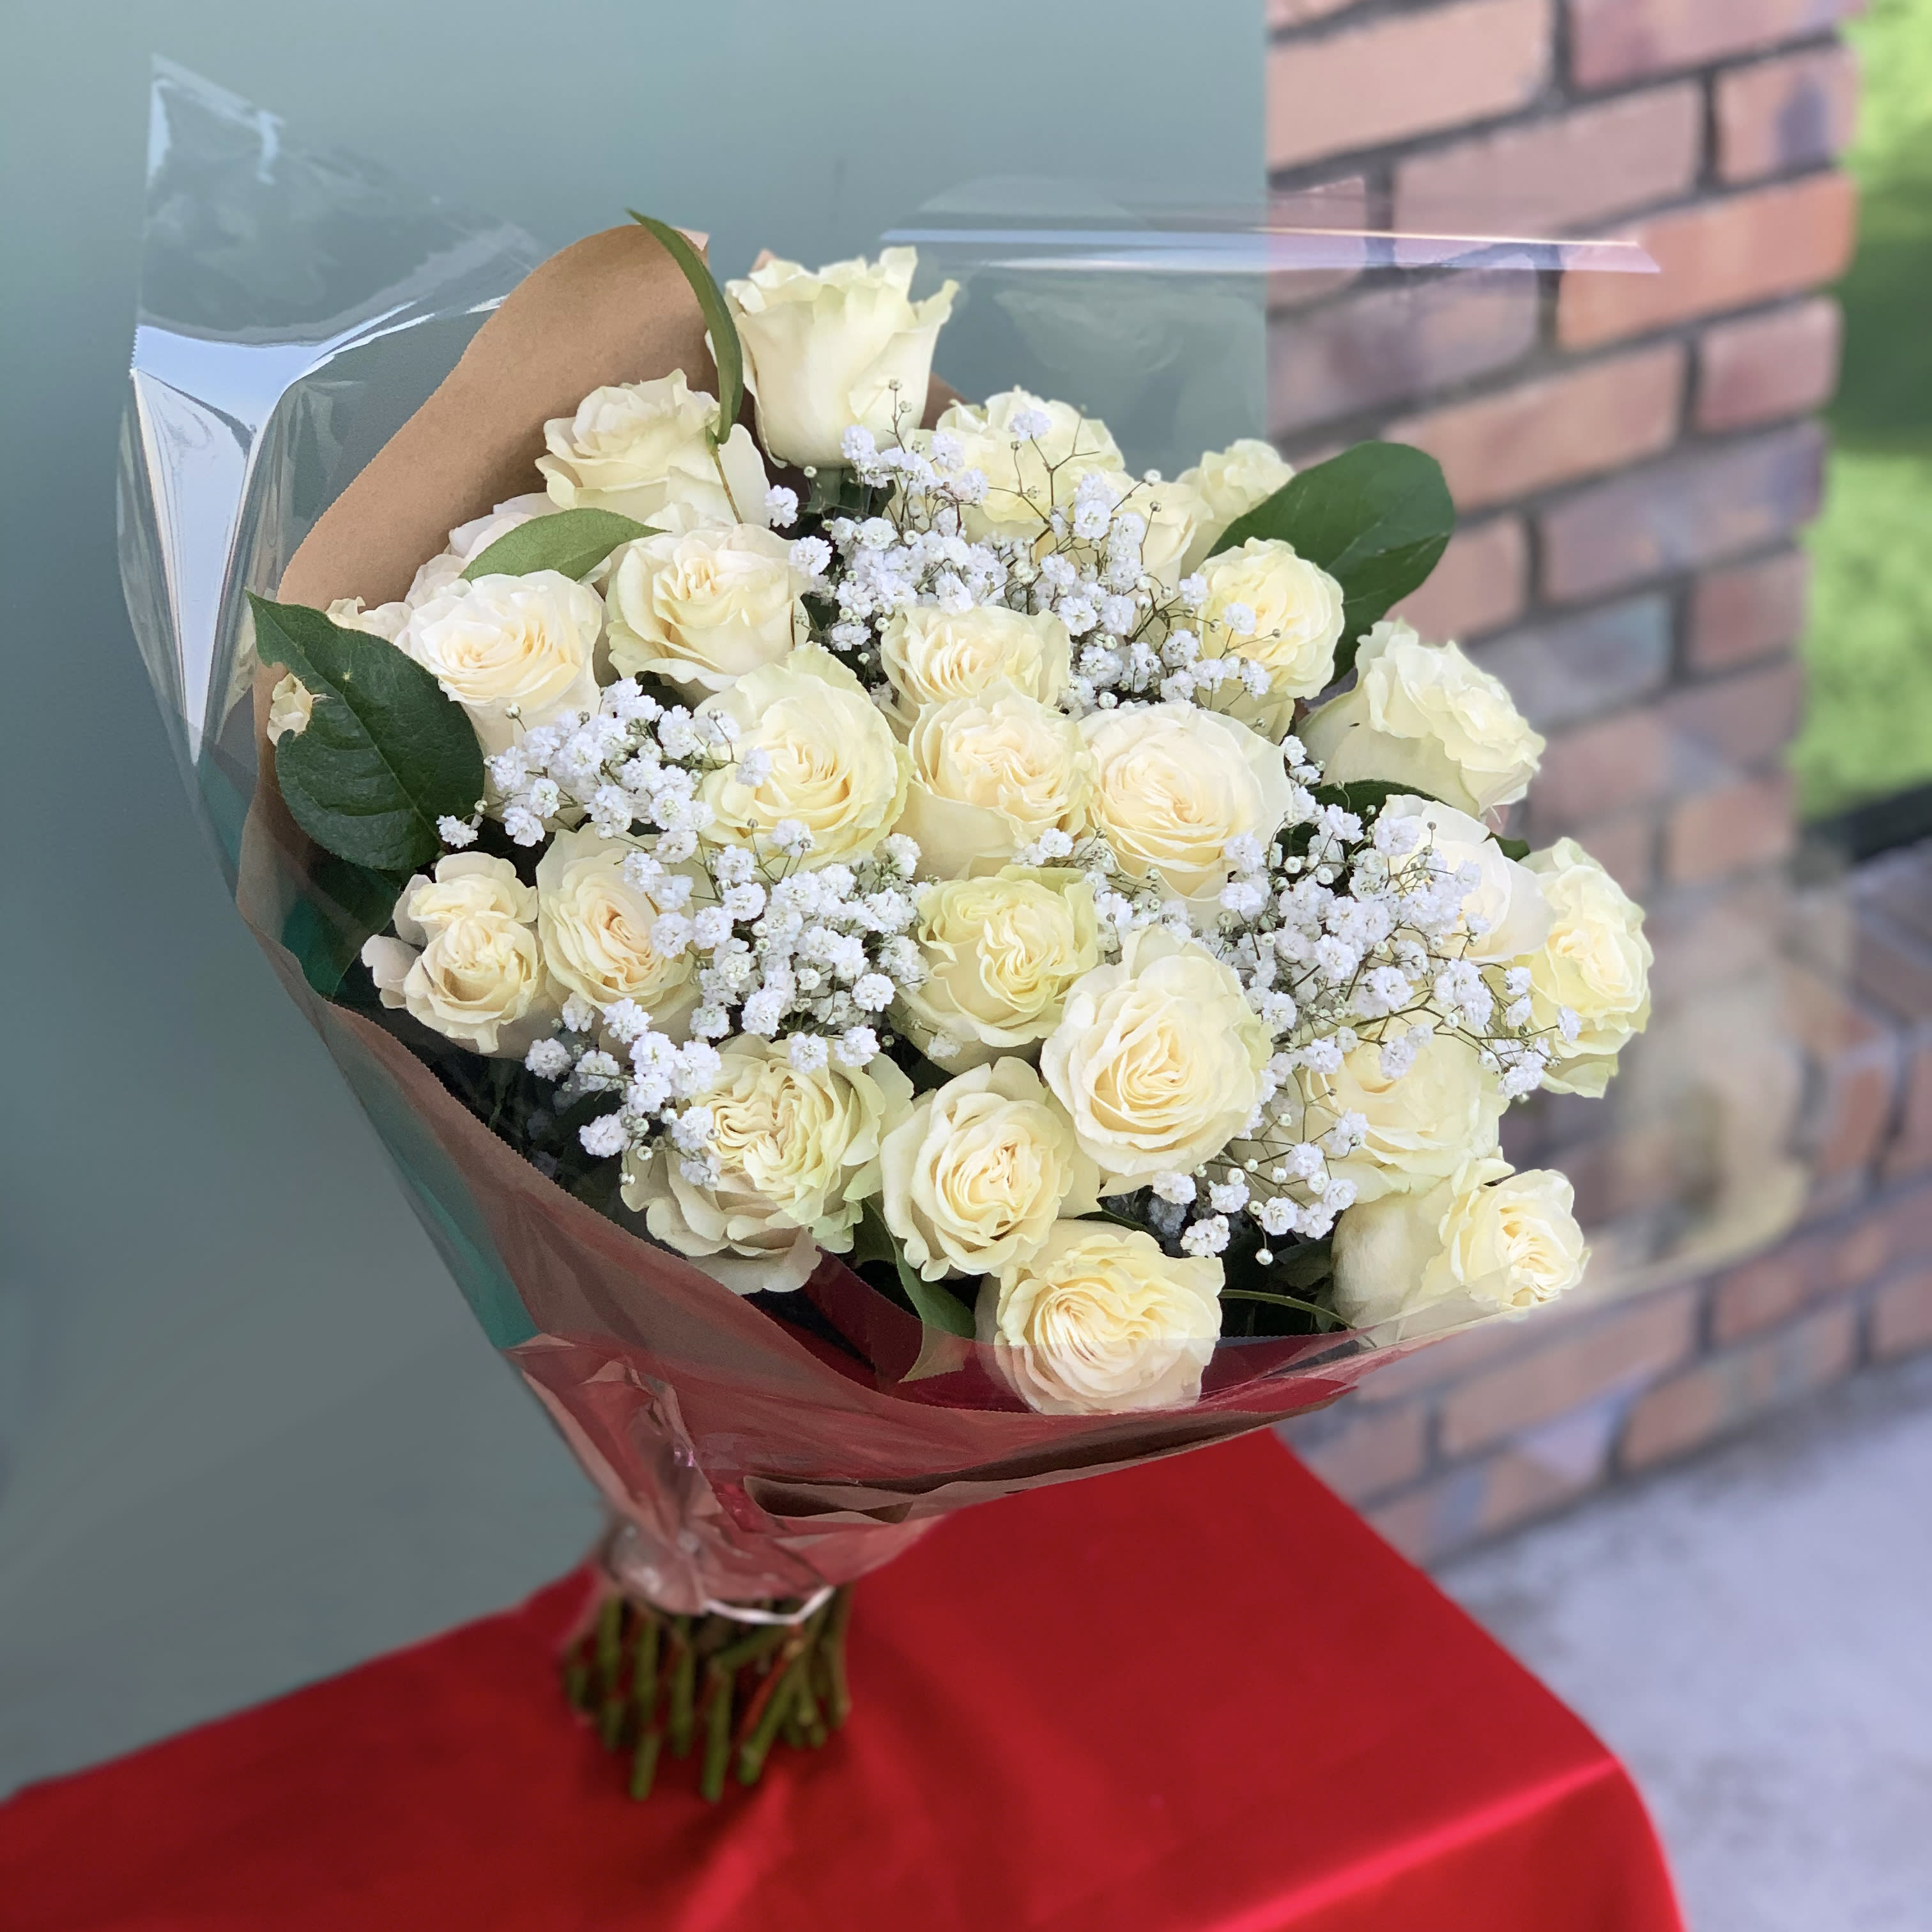 Winter Bliss - An elegant and luxurious bouquet of white roses for any special occasion